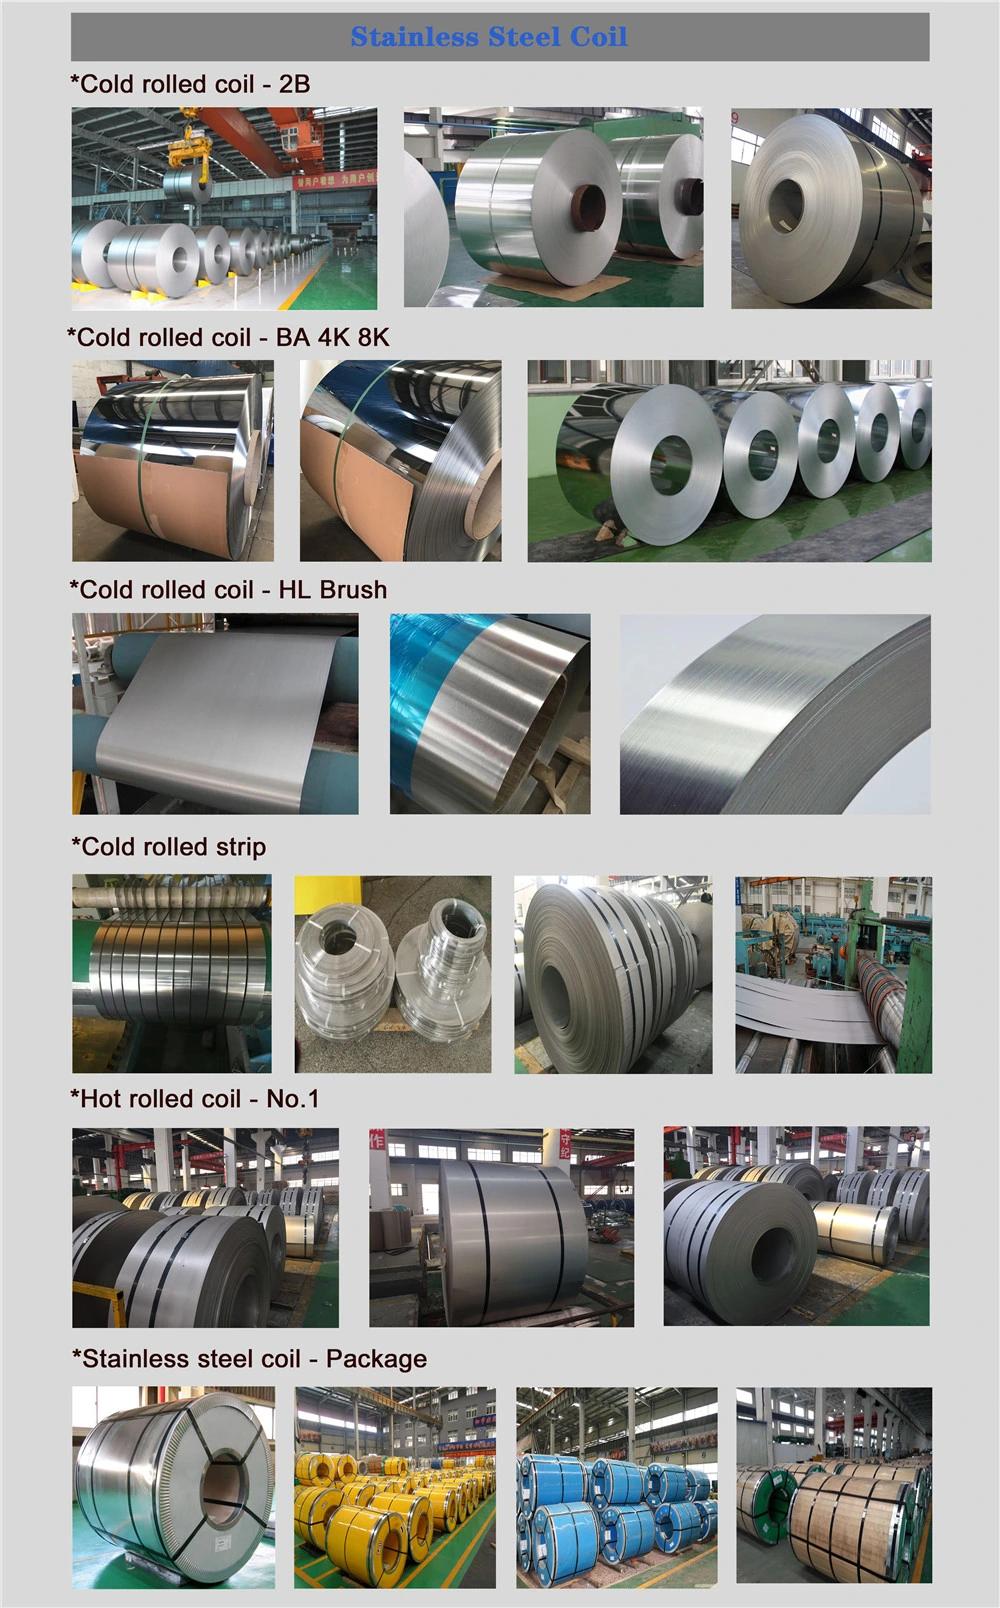 China Supplier 409 Steel Price AISI 409 Cold Rolled 2b Stainless Steel Sheet